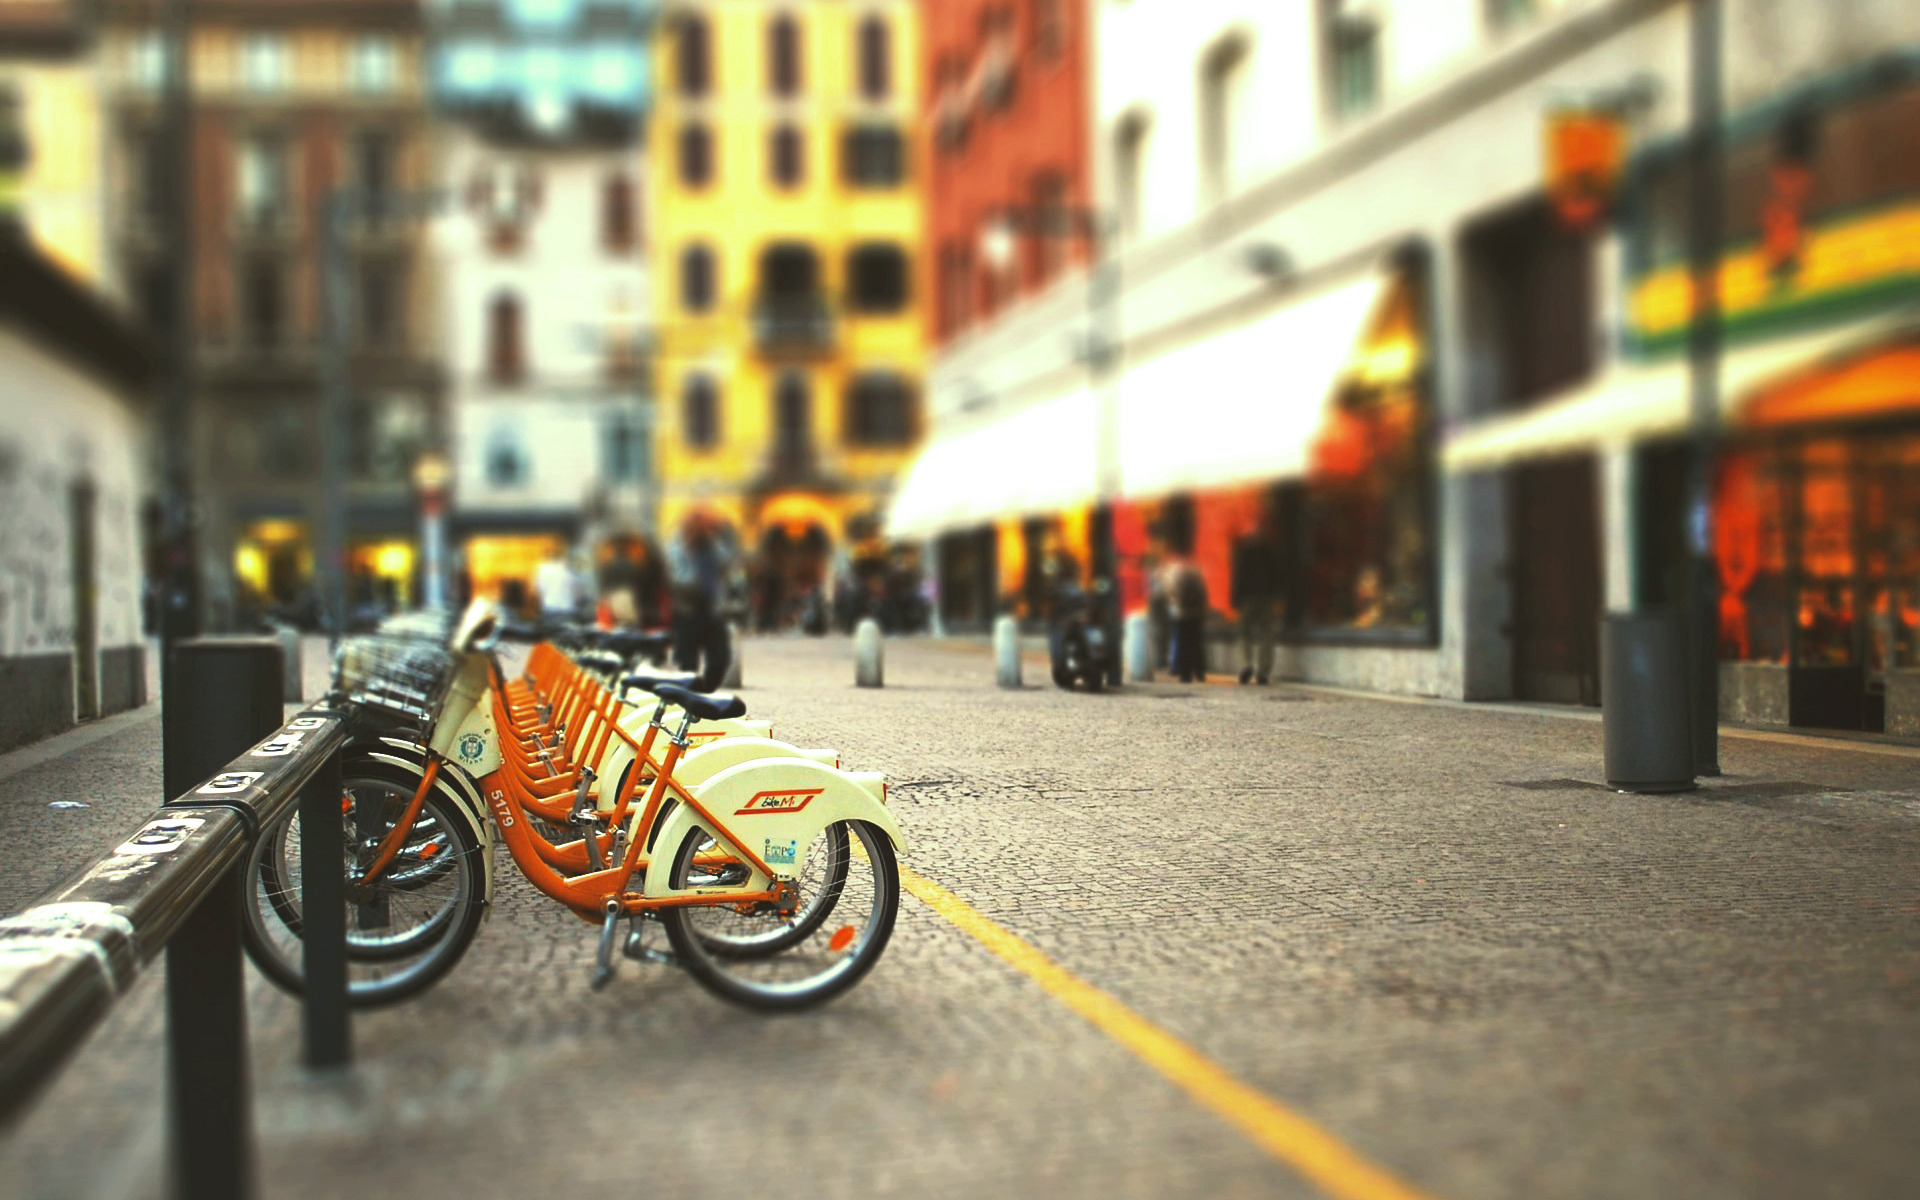  city street bike bicycle parking blurred background wallpapers